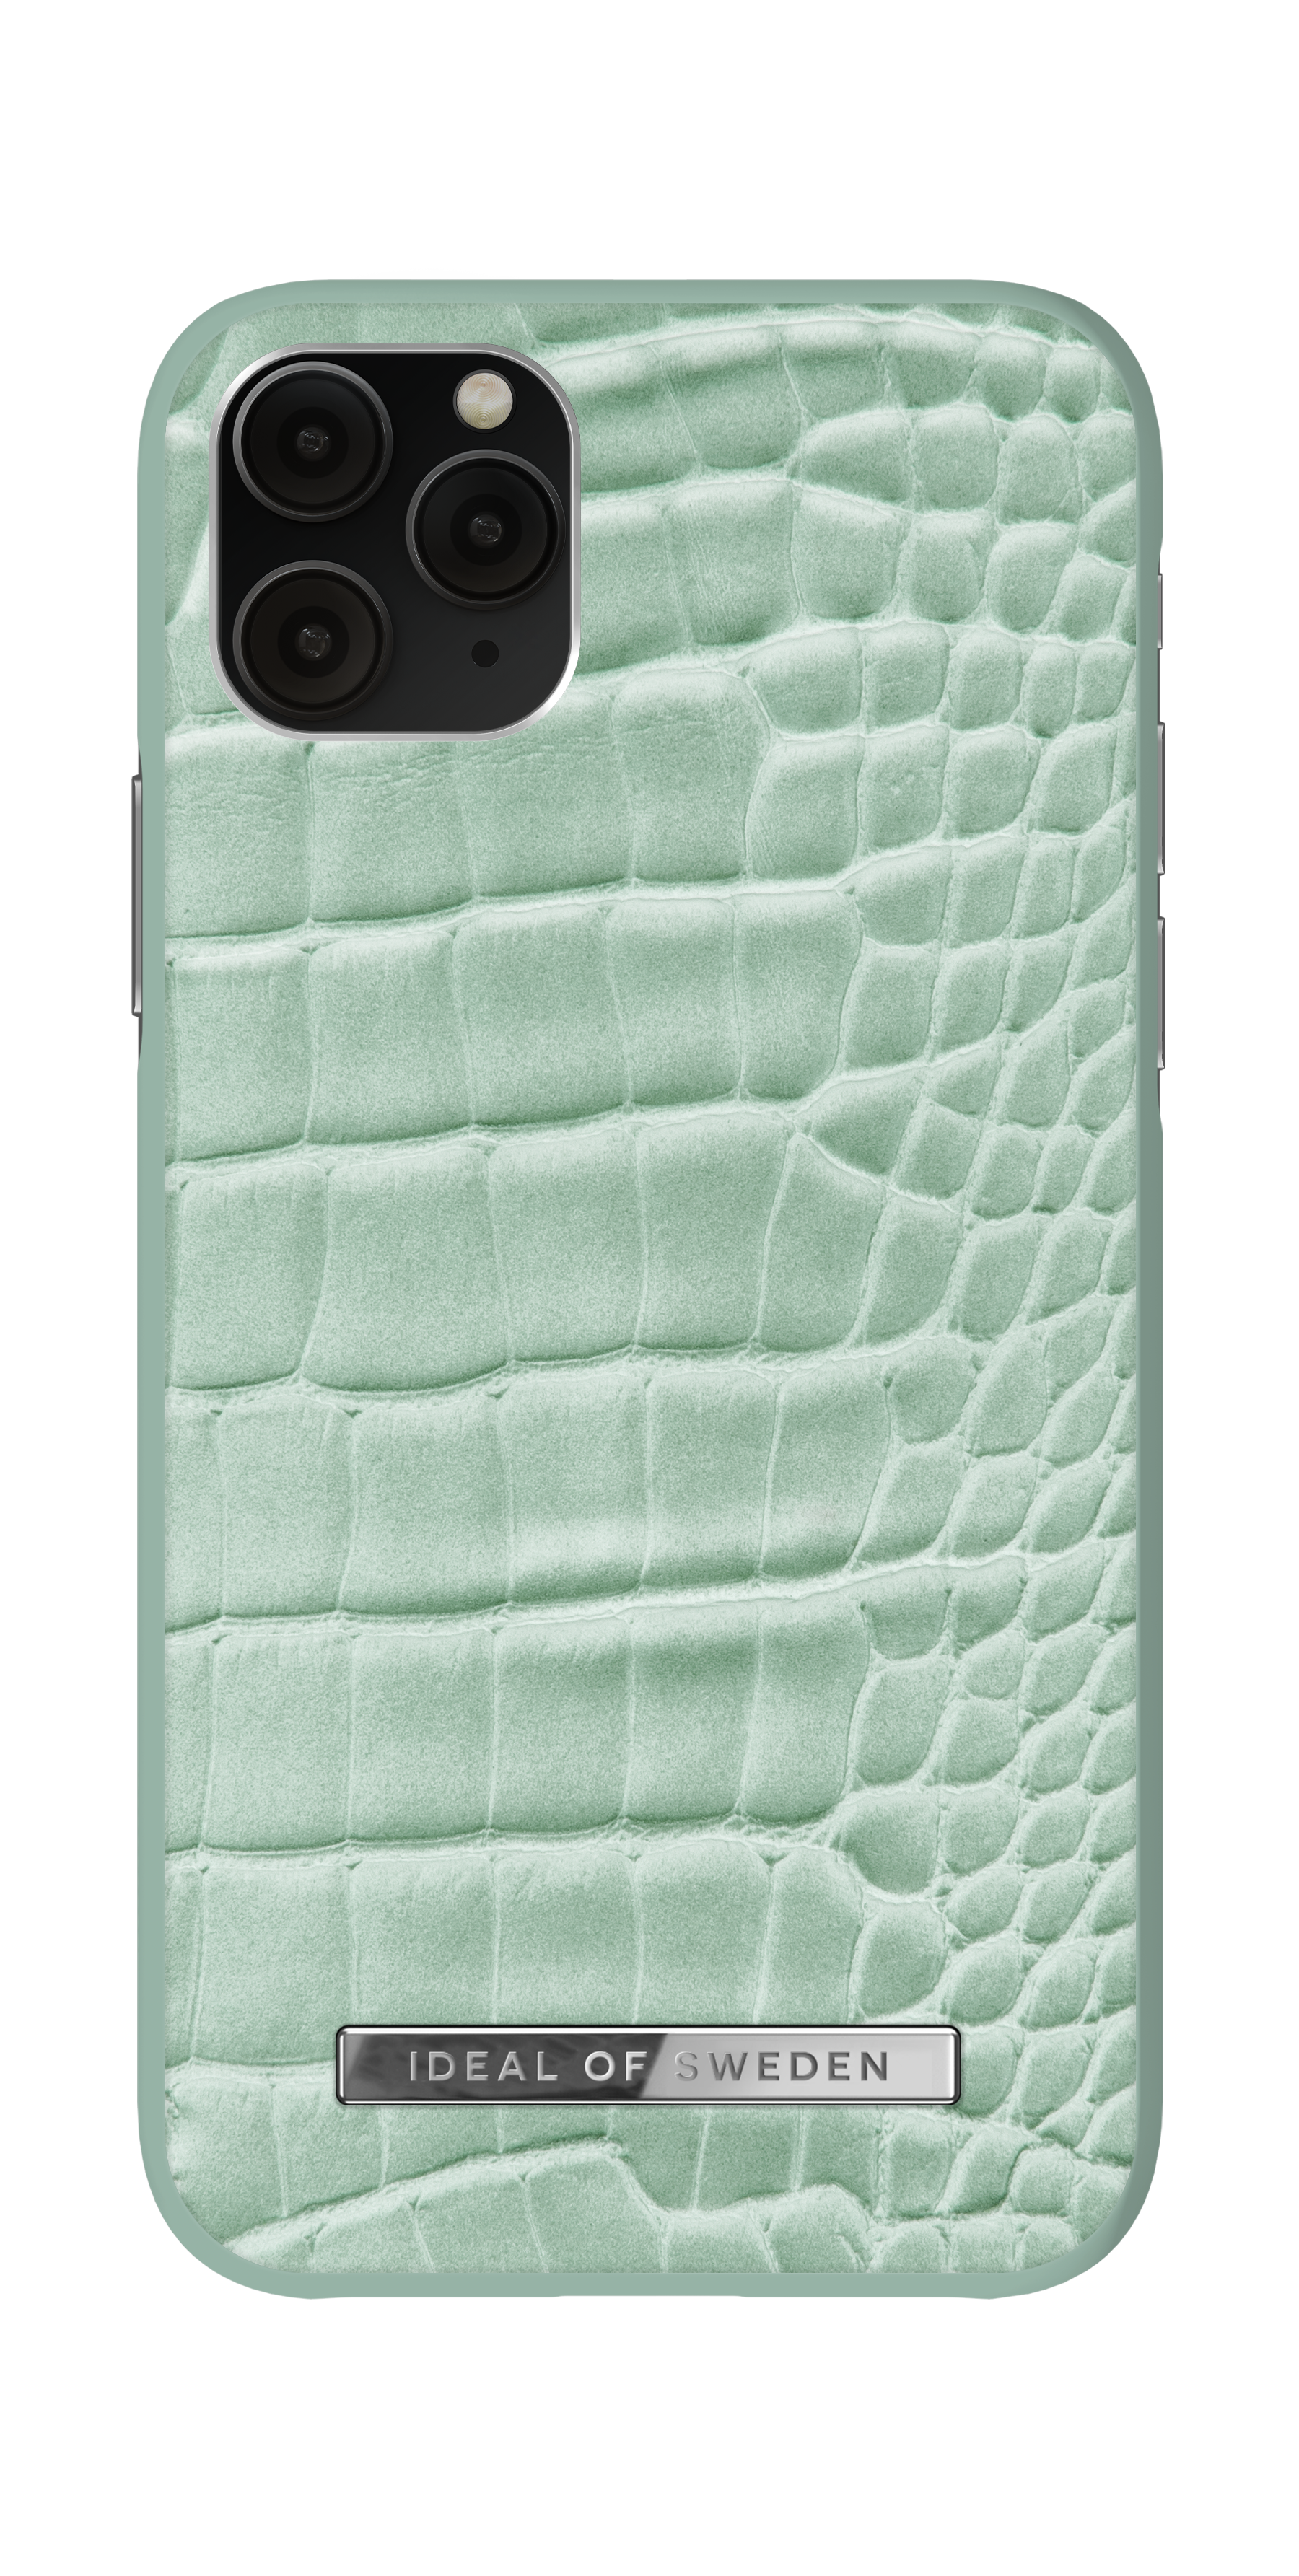 IDEAL OF SWEDEN Croco Apple, XS, IDACSS21-I1958-261, X, Backcover, Mint iPhone 11 iPhone iPhone Pro